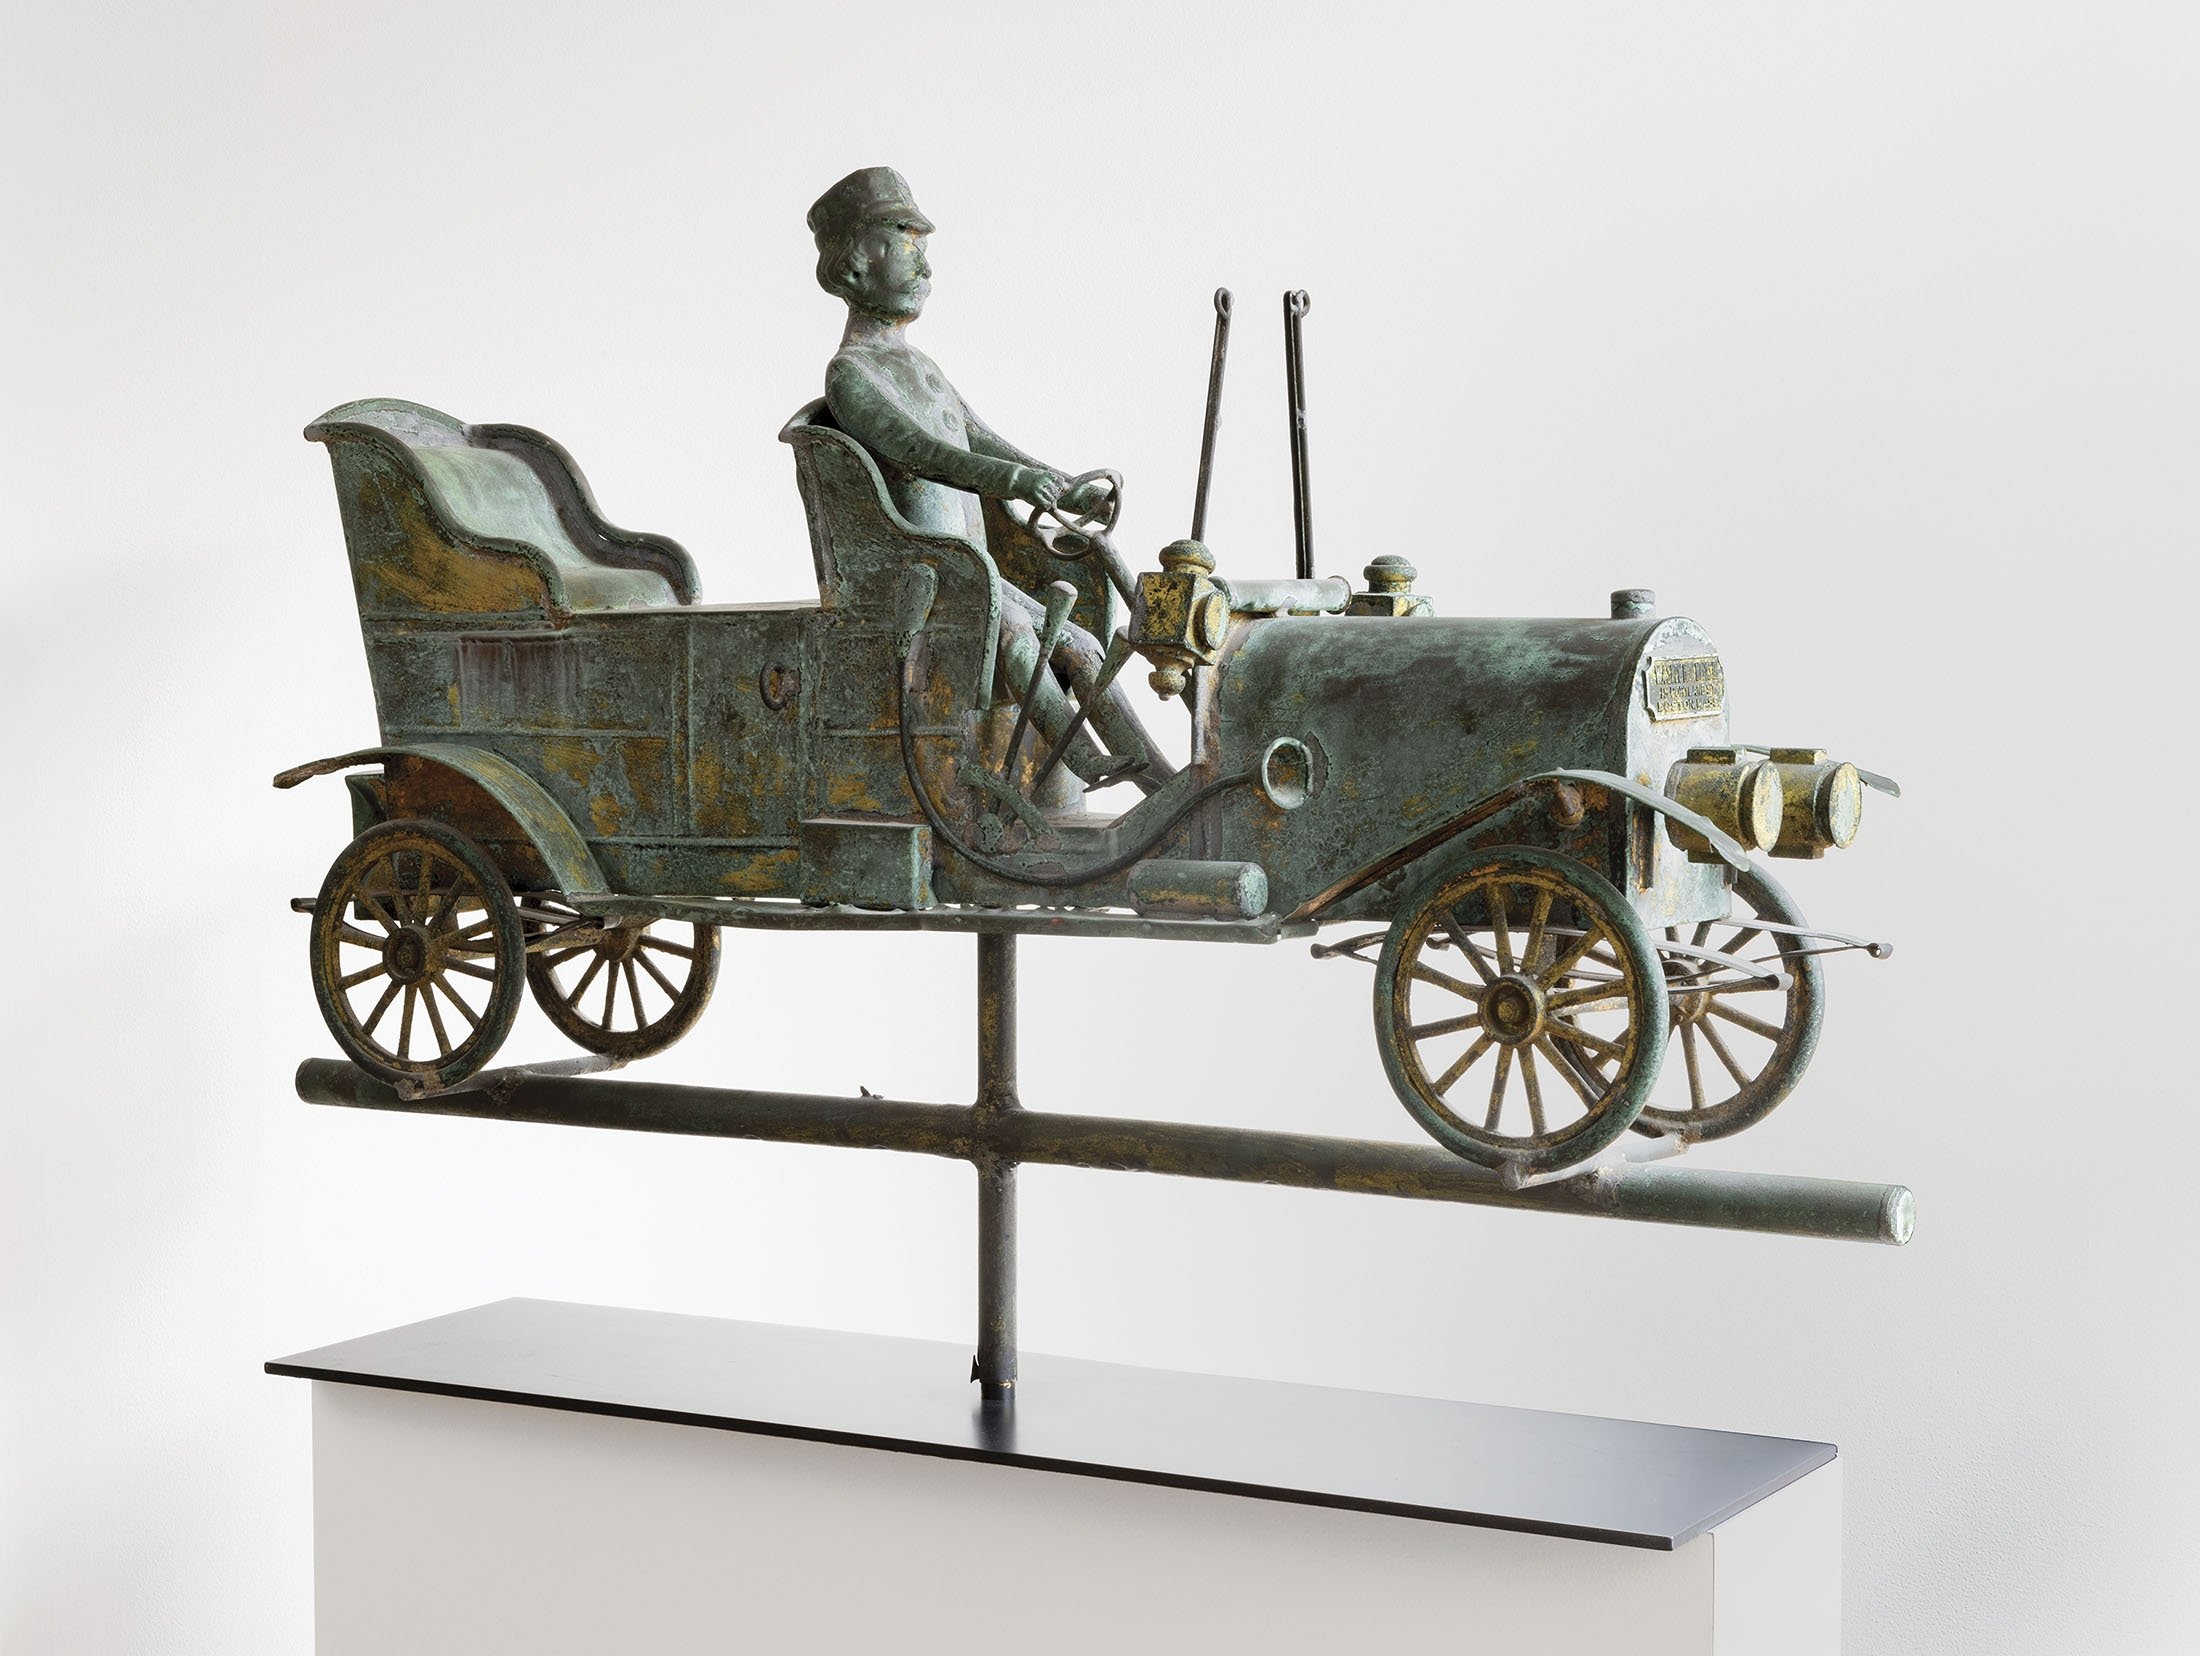 A Touring Car and Driver weather vane. (American Folk Art Museum via AP)